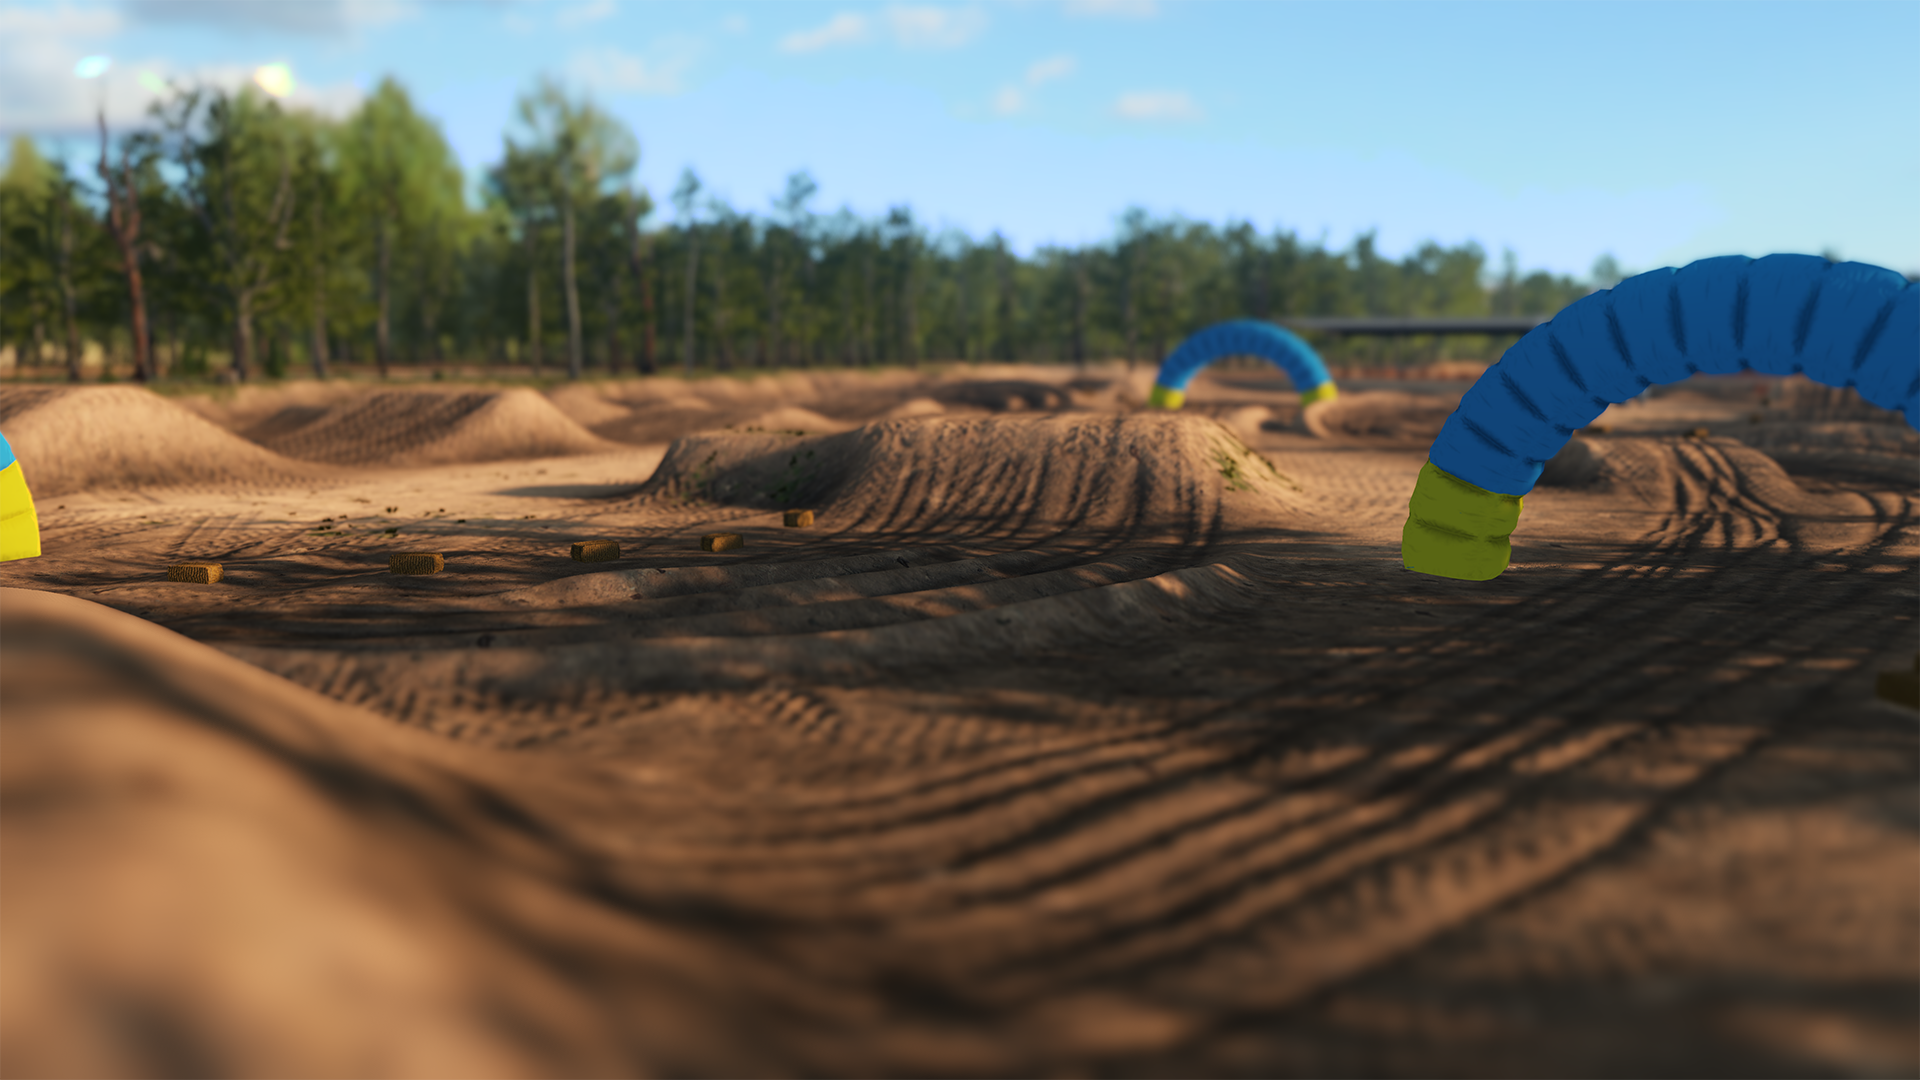 A picture of a supercross track from the game 'Motocross: Chasing the Dream'